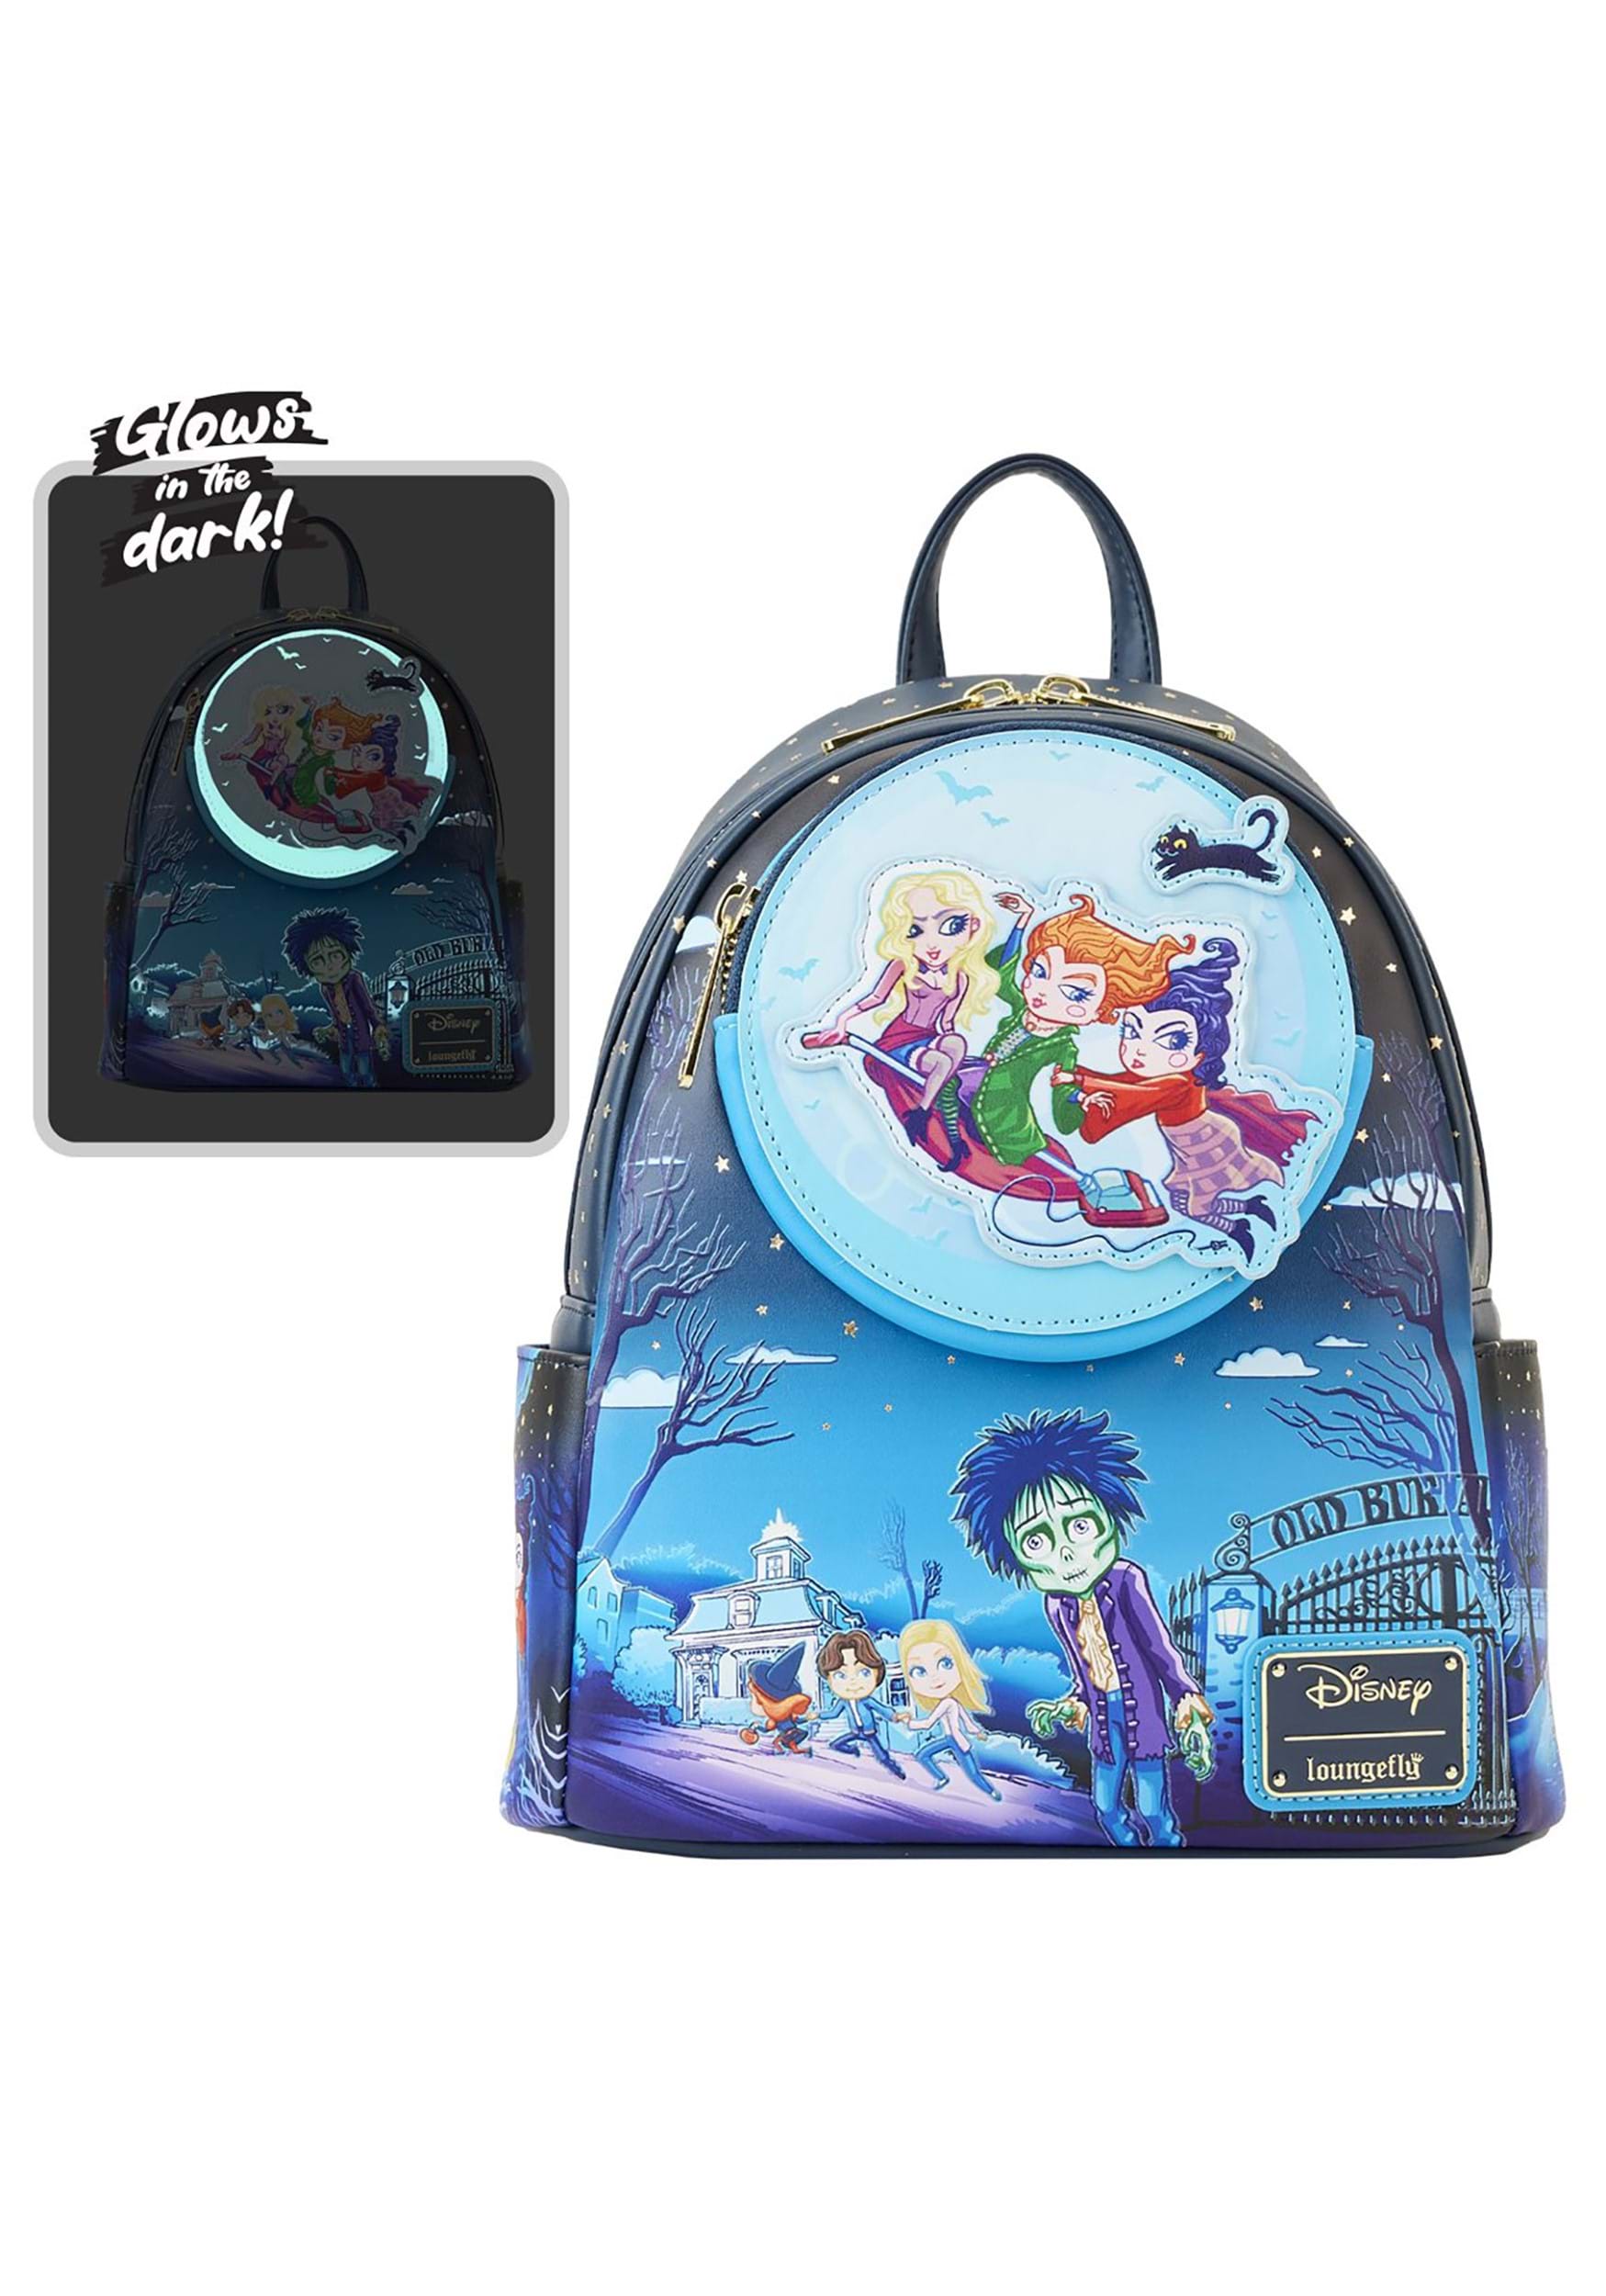 Snow White Castle Series Loungefly Mini-Backpack